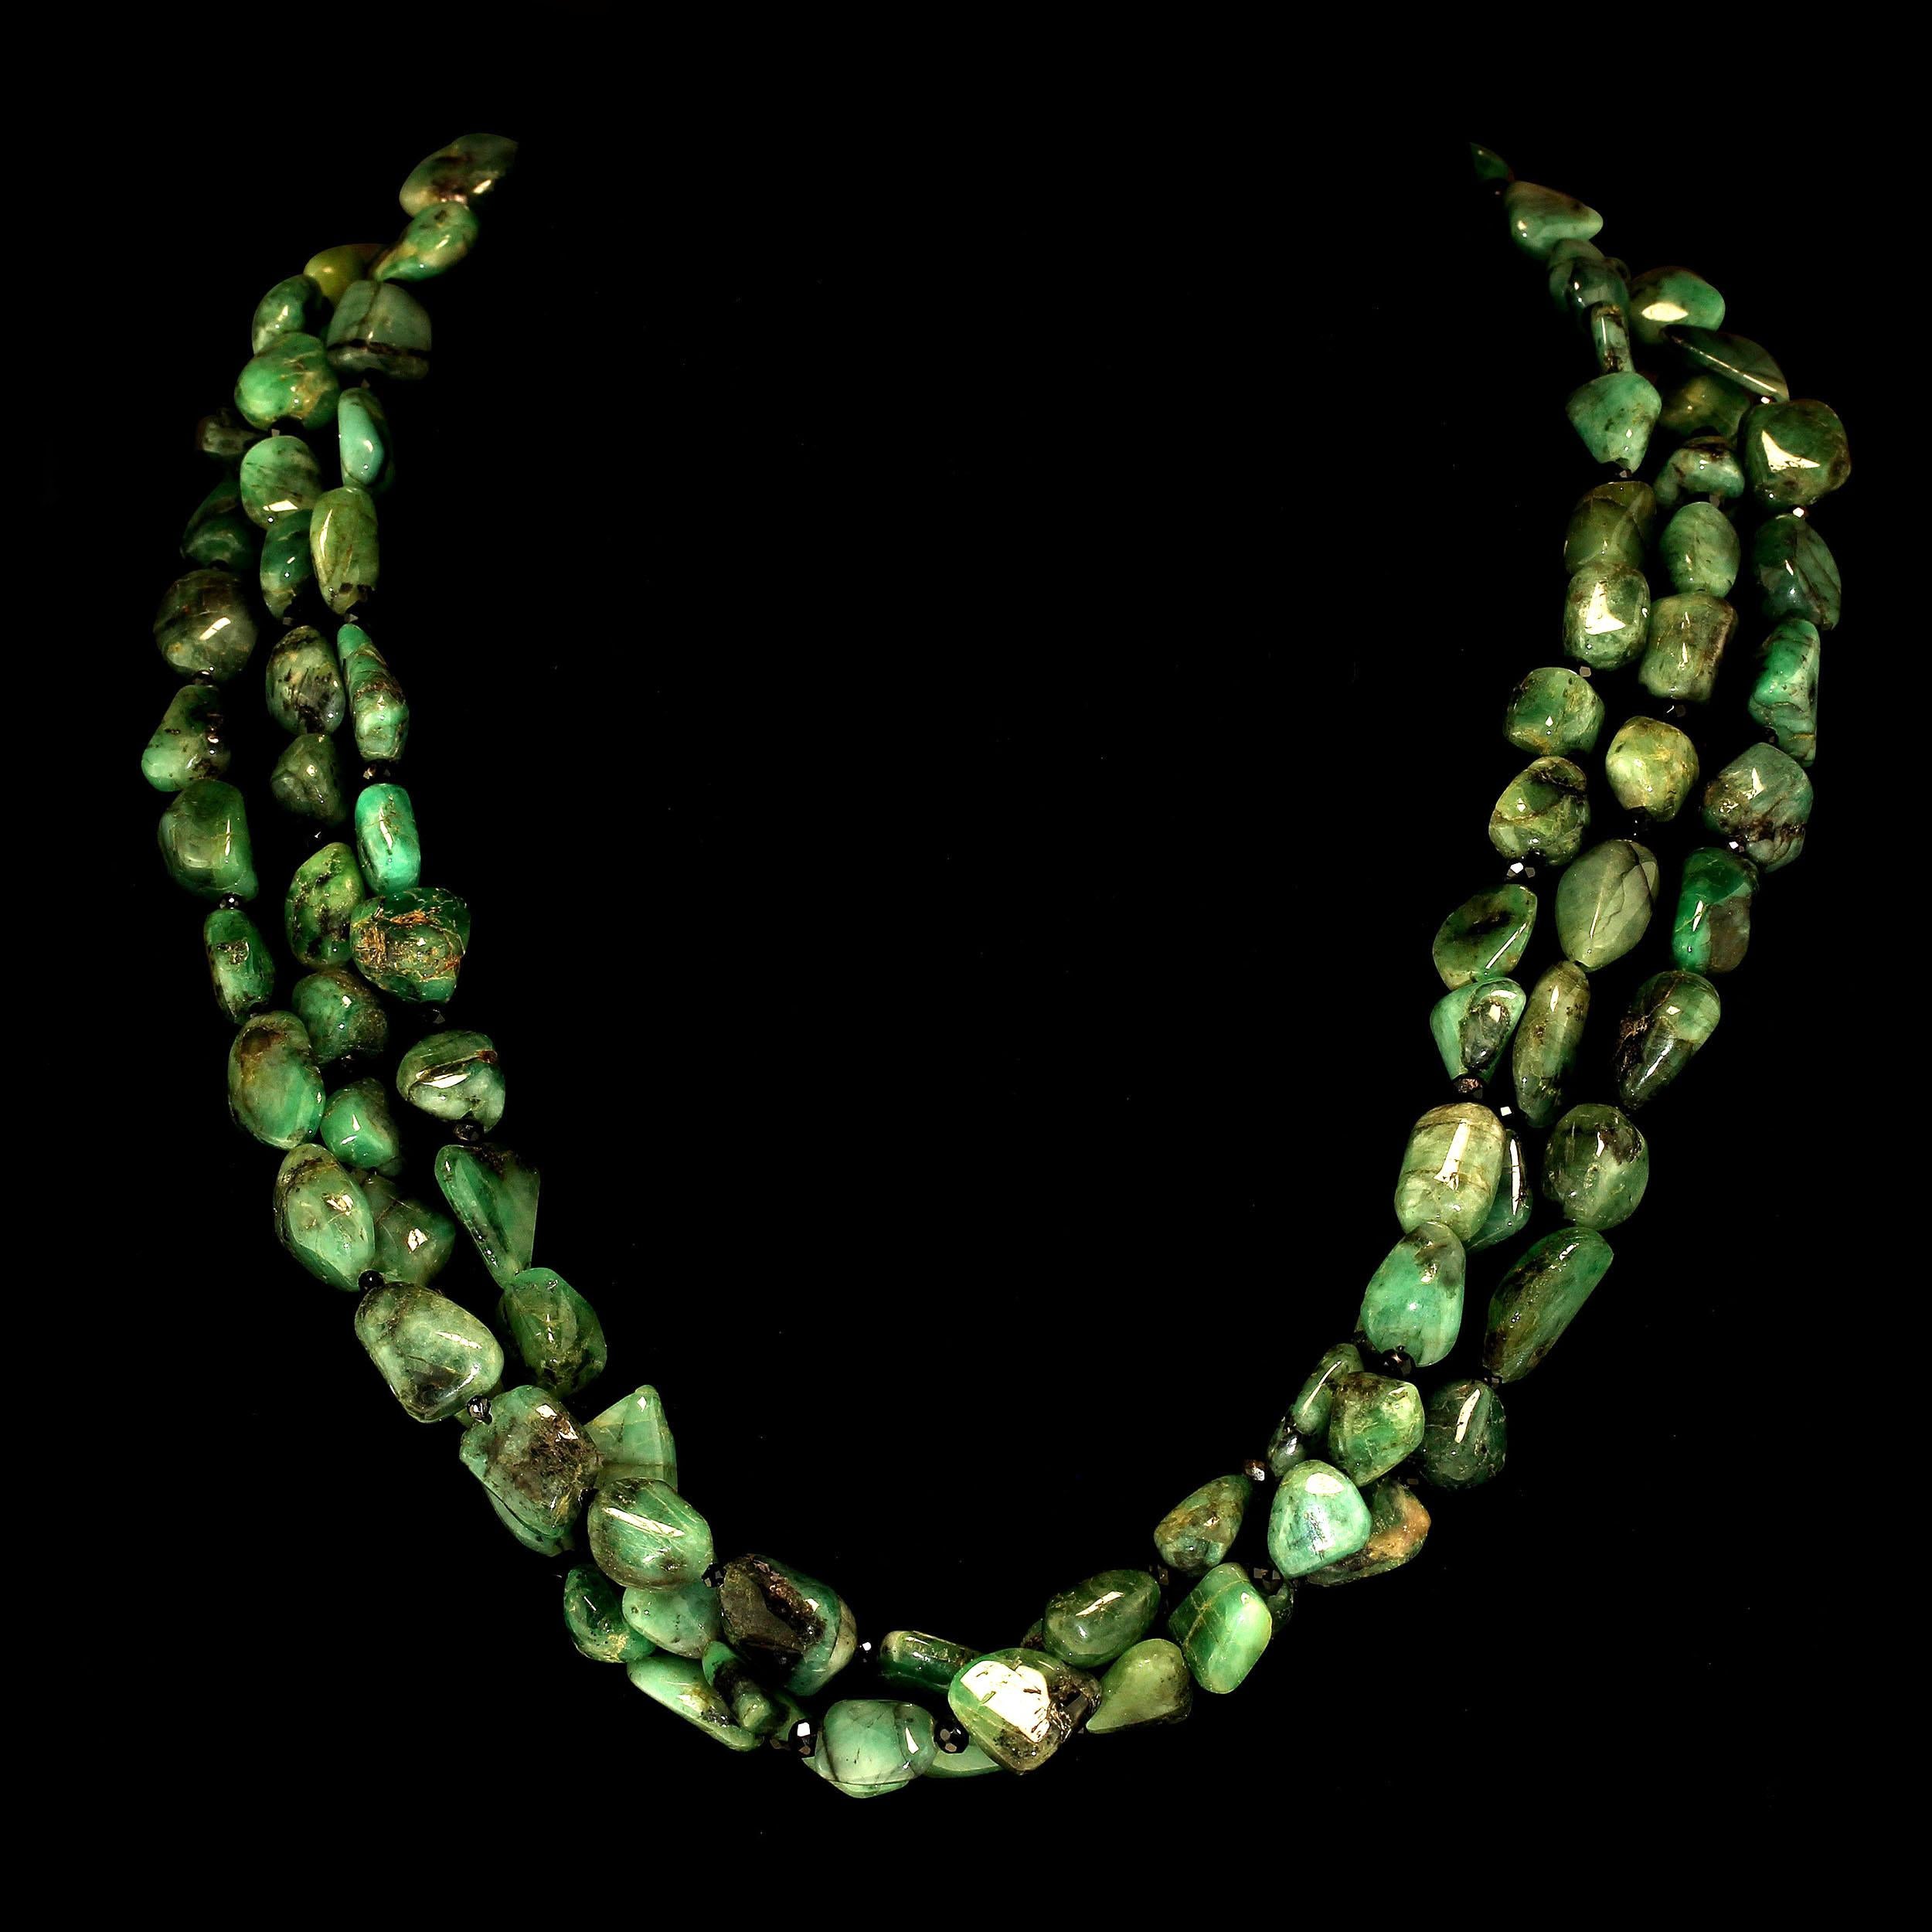 Handmade, elegant three strand Emerald in matrix nugget necklace.  This Gemjunky unique 19 inch necklace is three strands of highly polished Emerald nuggets accented with sparkling faceted black Spinel. These lovely nuggets are complementary to all